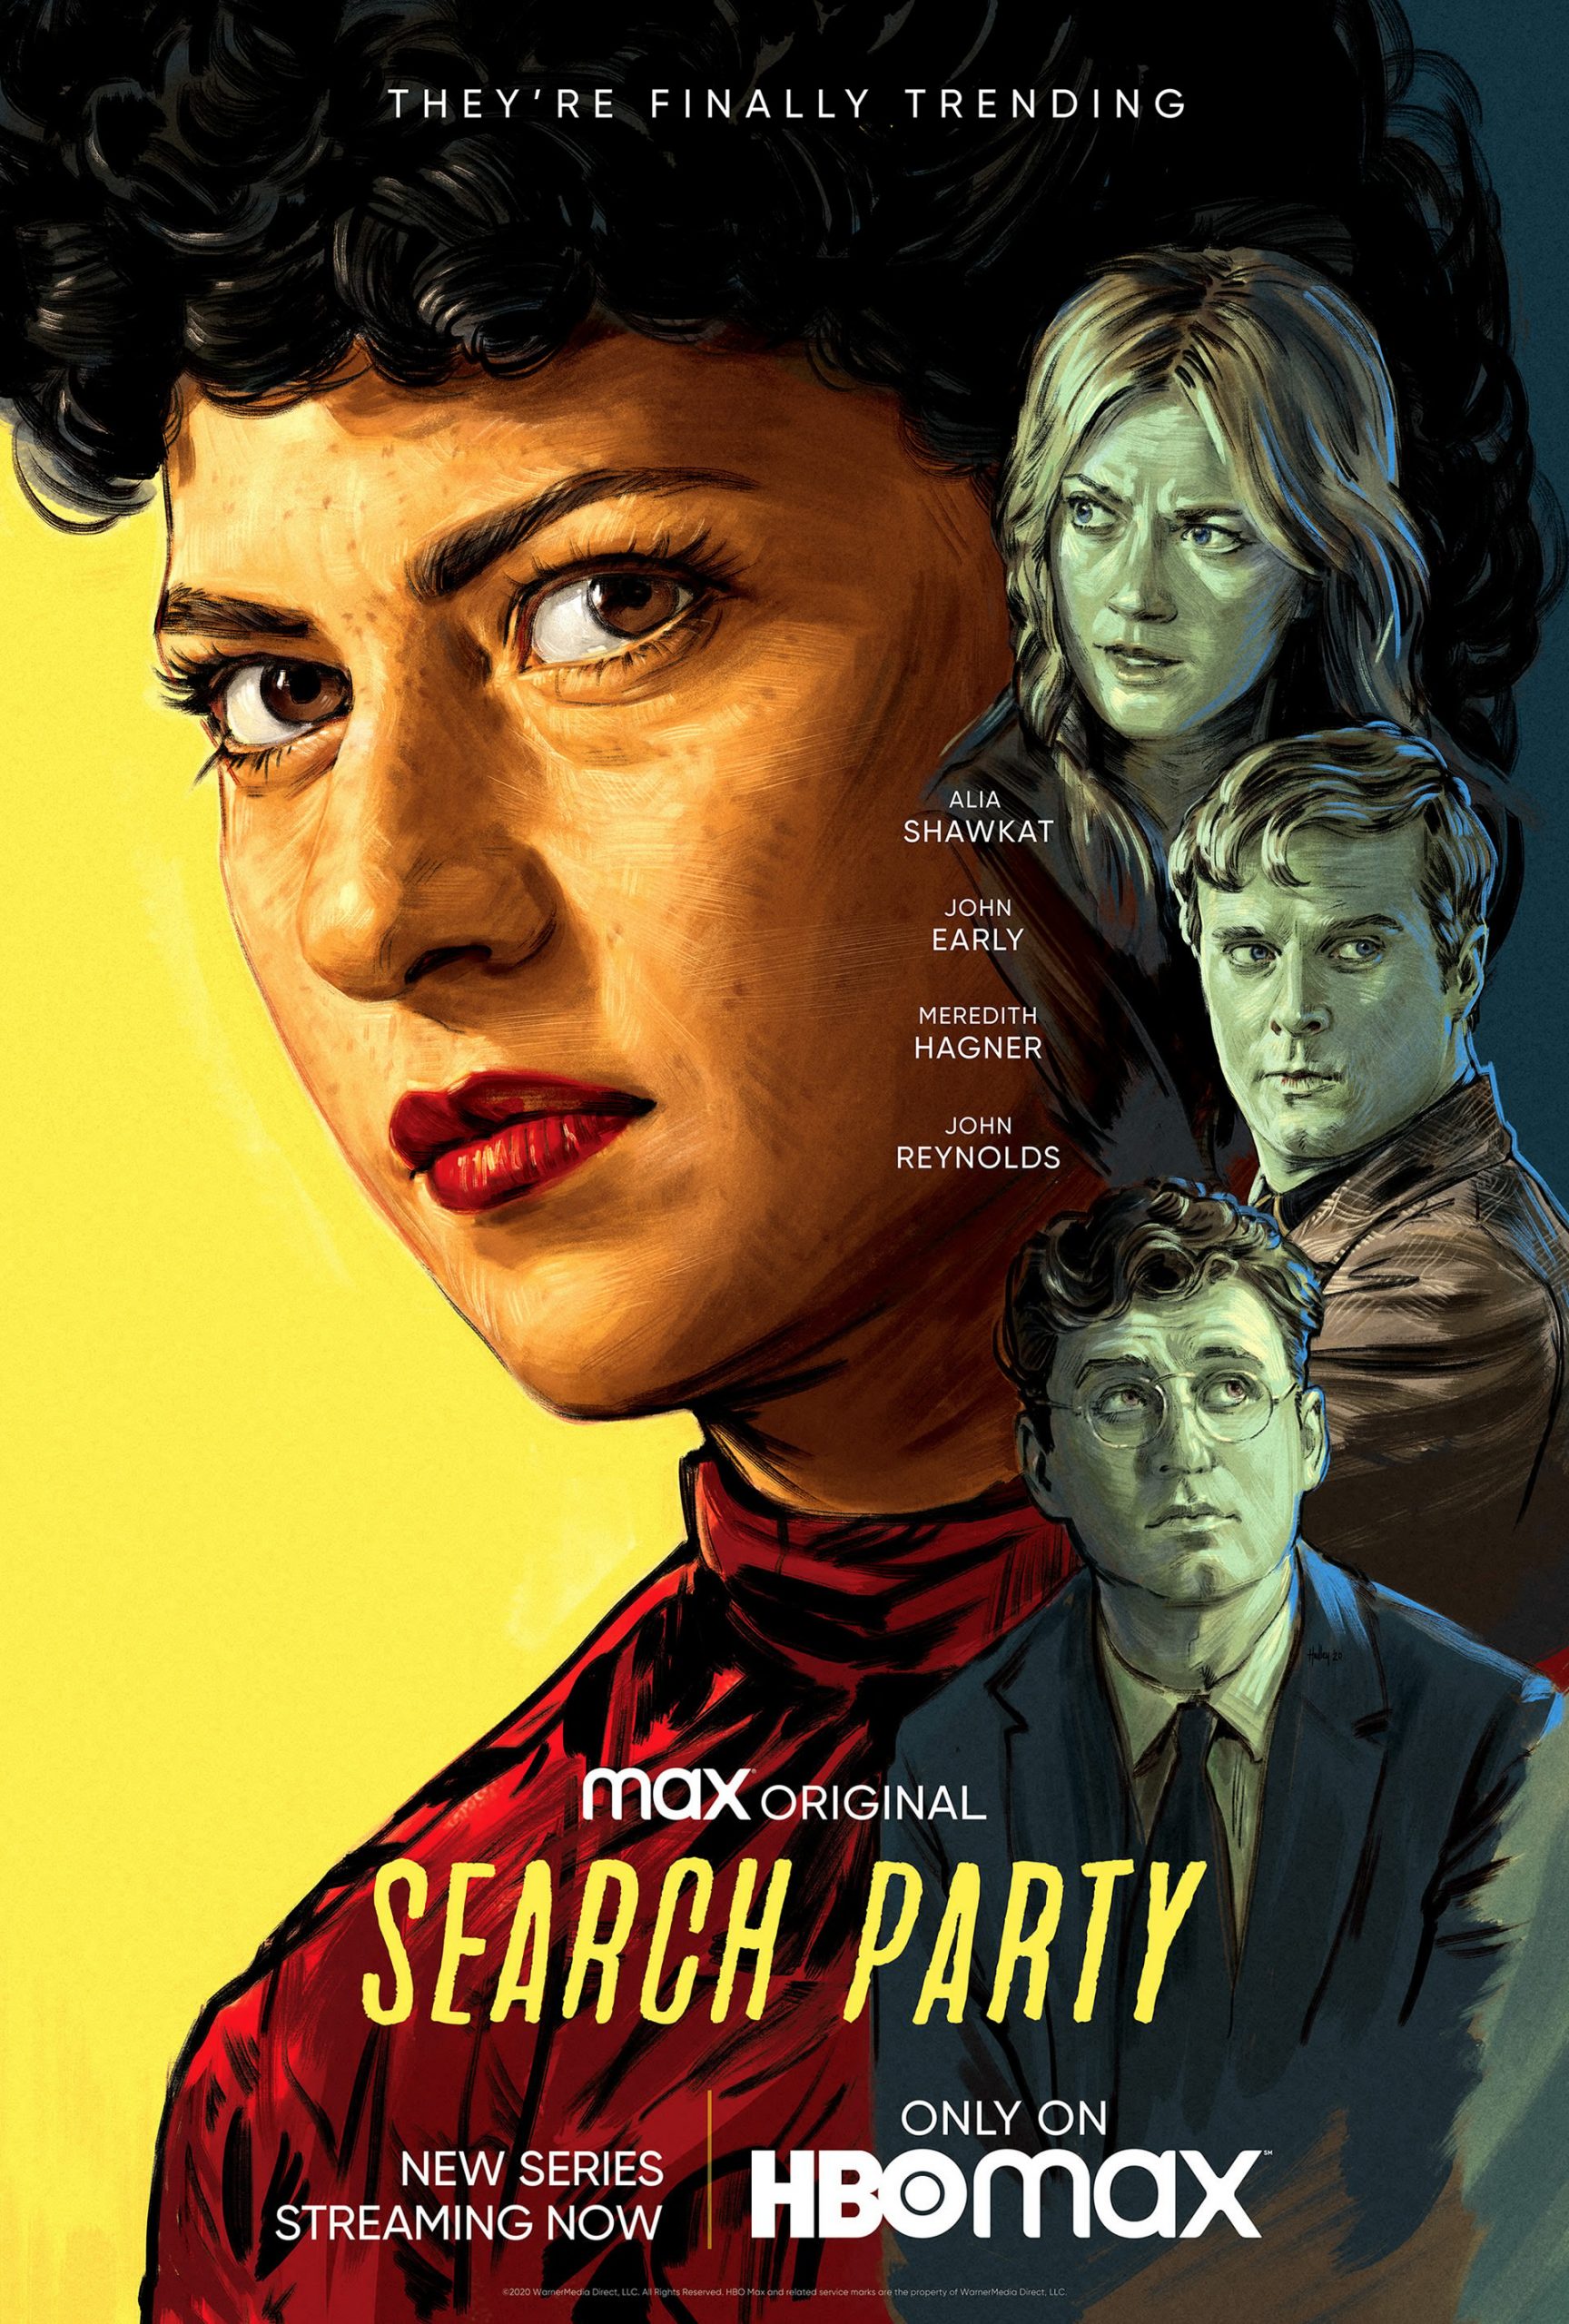 Serie Search Party